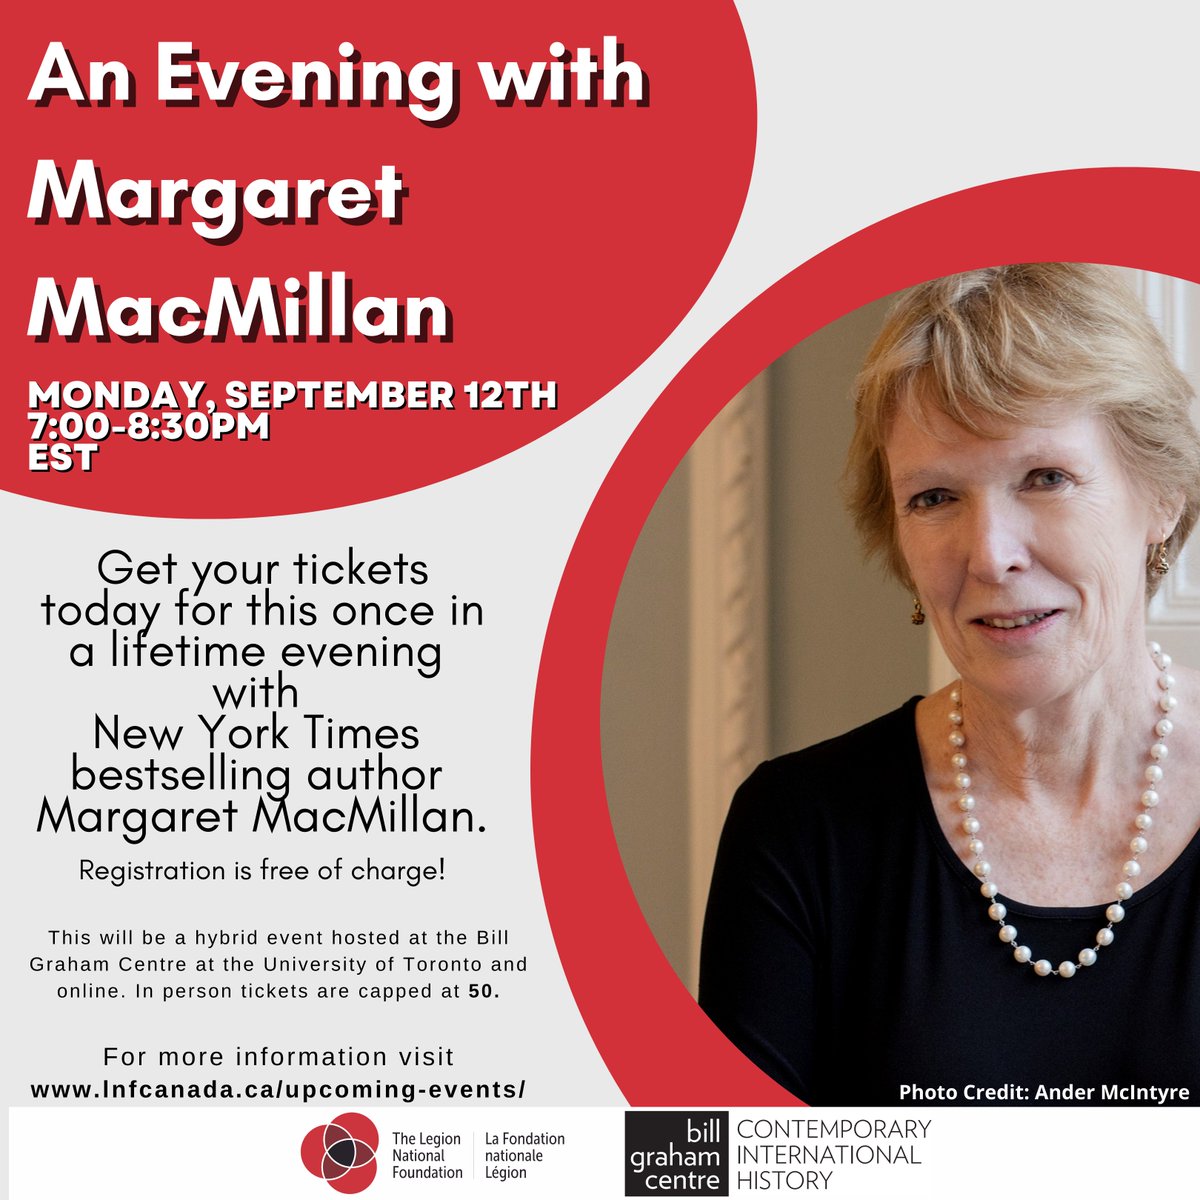 Want to hear from one of Canada's greatest historians and support Cnd Veterans? Join us for An Evening with Margaret MacMillan in partnership with 
@BGCCIH

Reserve your spot today at lnfcanada.ca/an-evening-wit…

#MilitaryHistory #MargaretMacMillan  #CanadianMilitary #FemaleAuthors